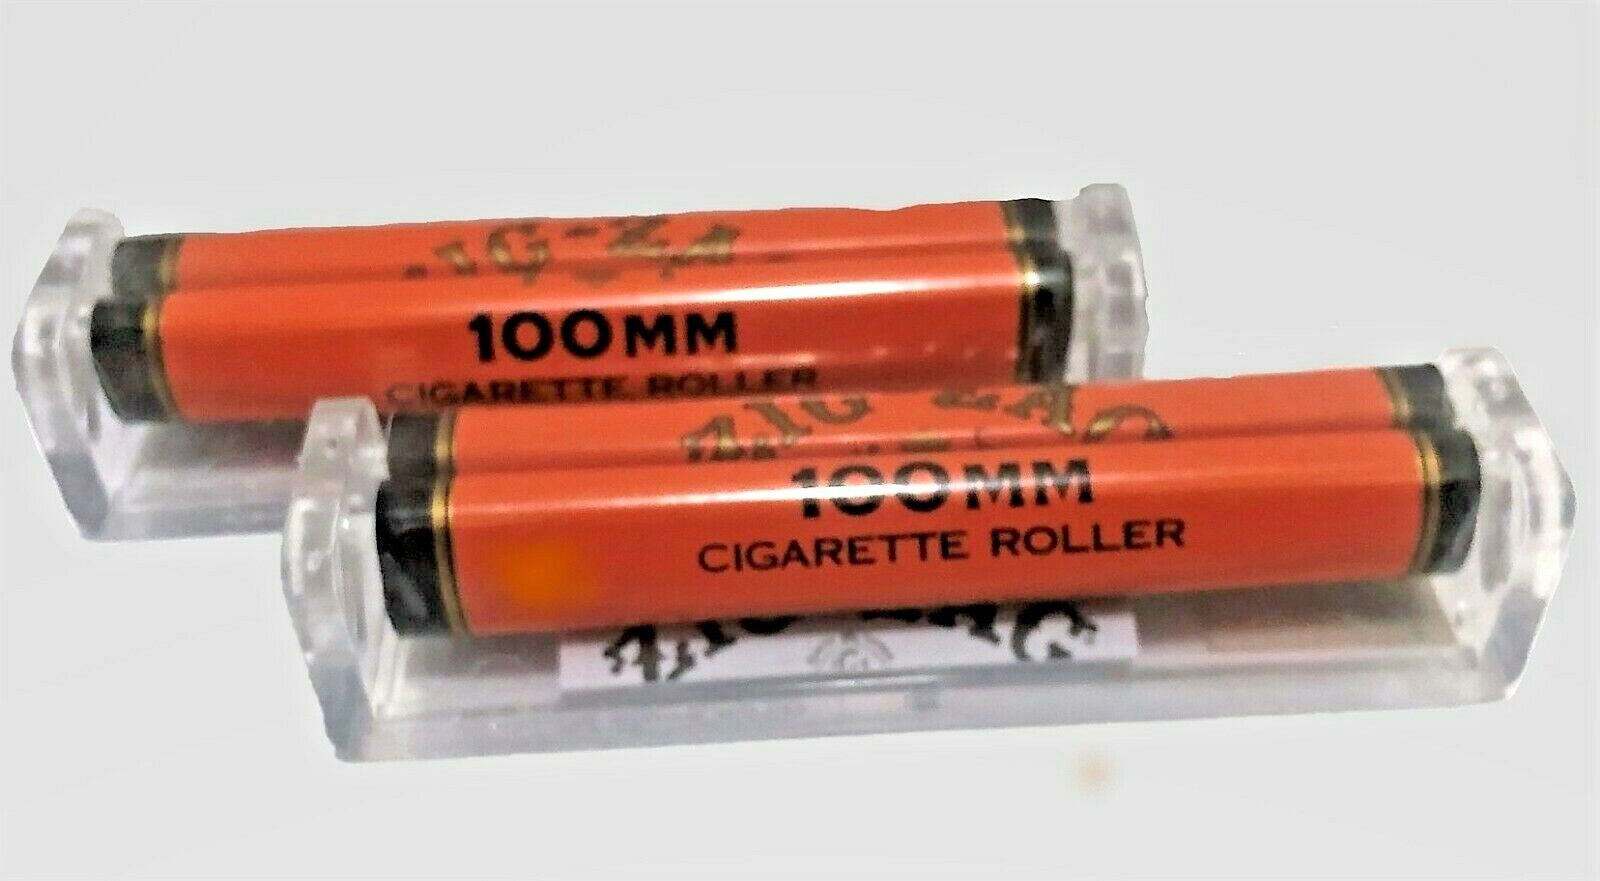 Zig Zag AUTHENTIC Cigarette Rollers/ Rolling Machines x2 100mm *FREE SHIPPING*